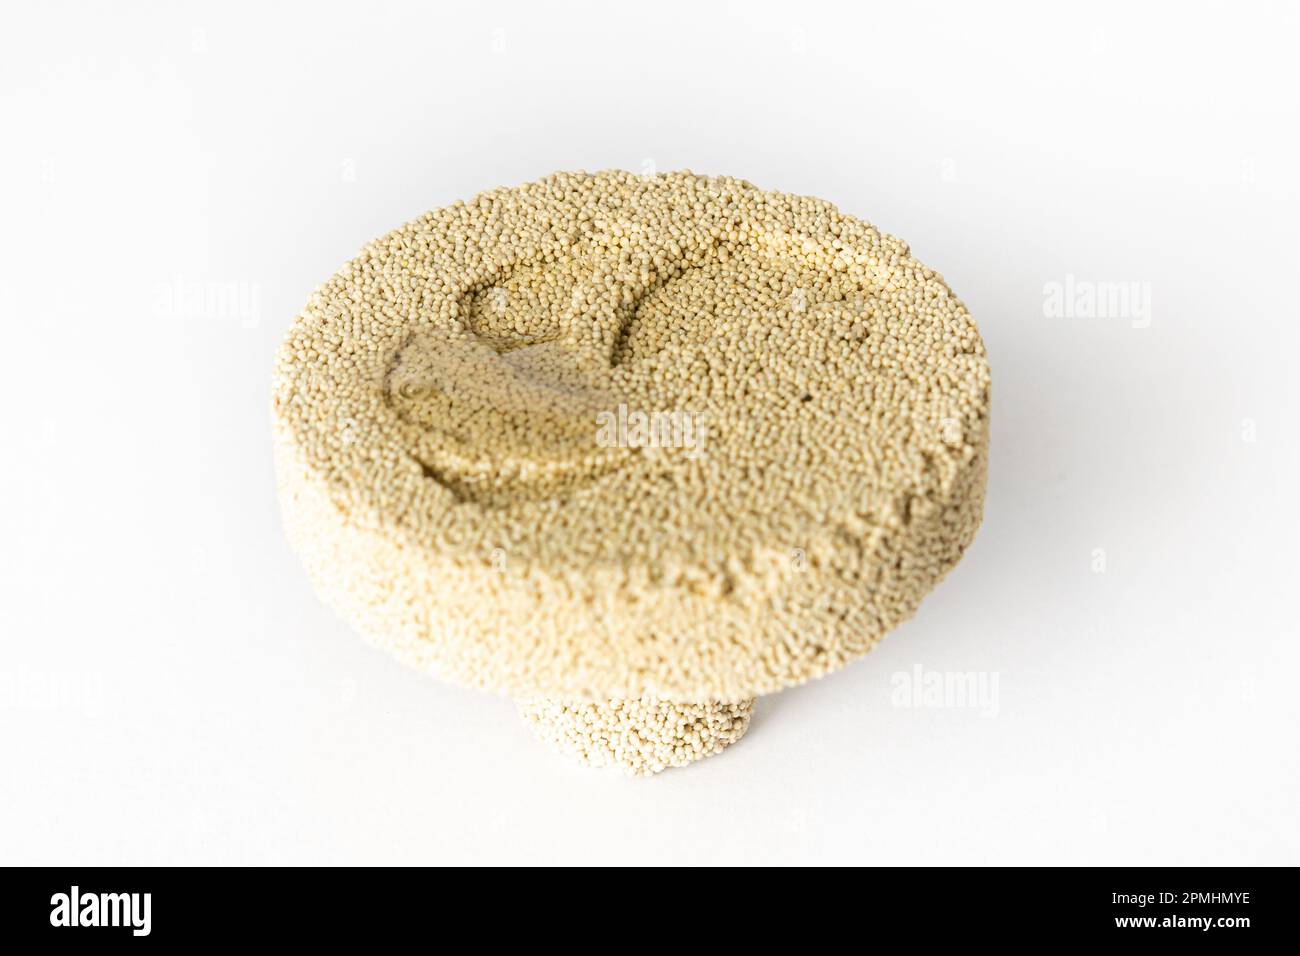 Base made of porous ceramic for fixing corals, widely used in marine aquariums. Stock Photo